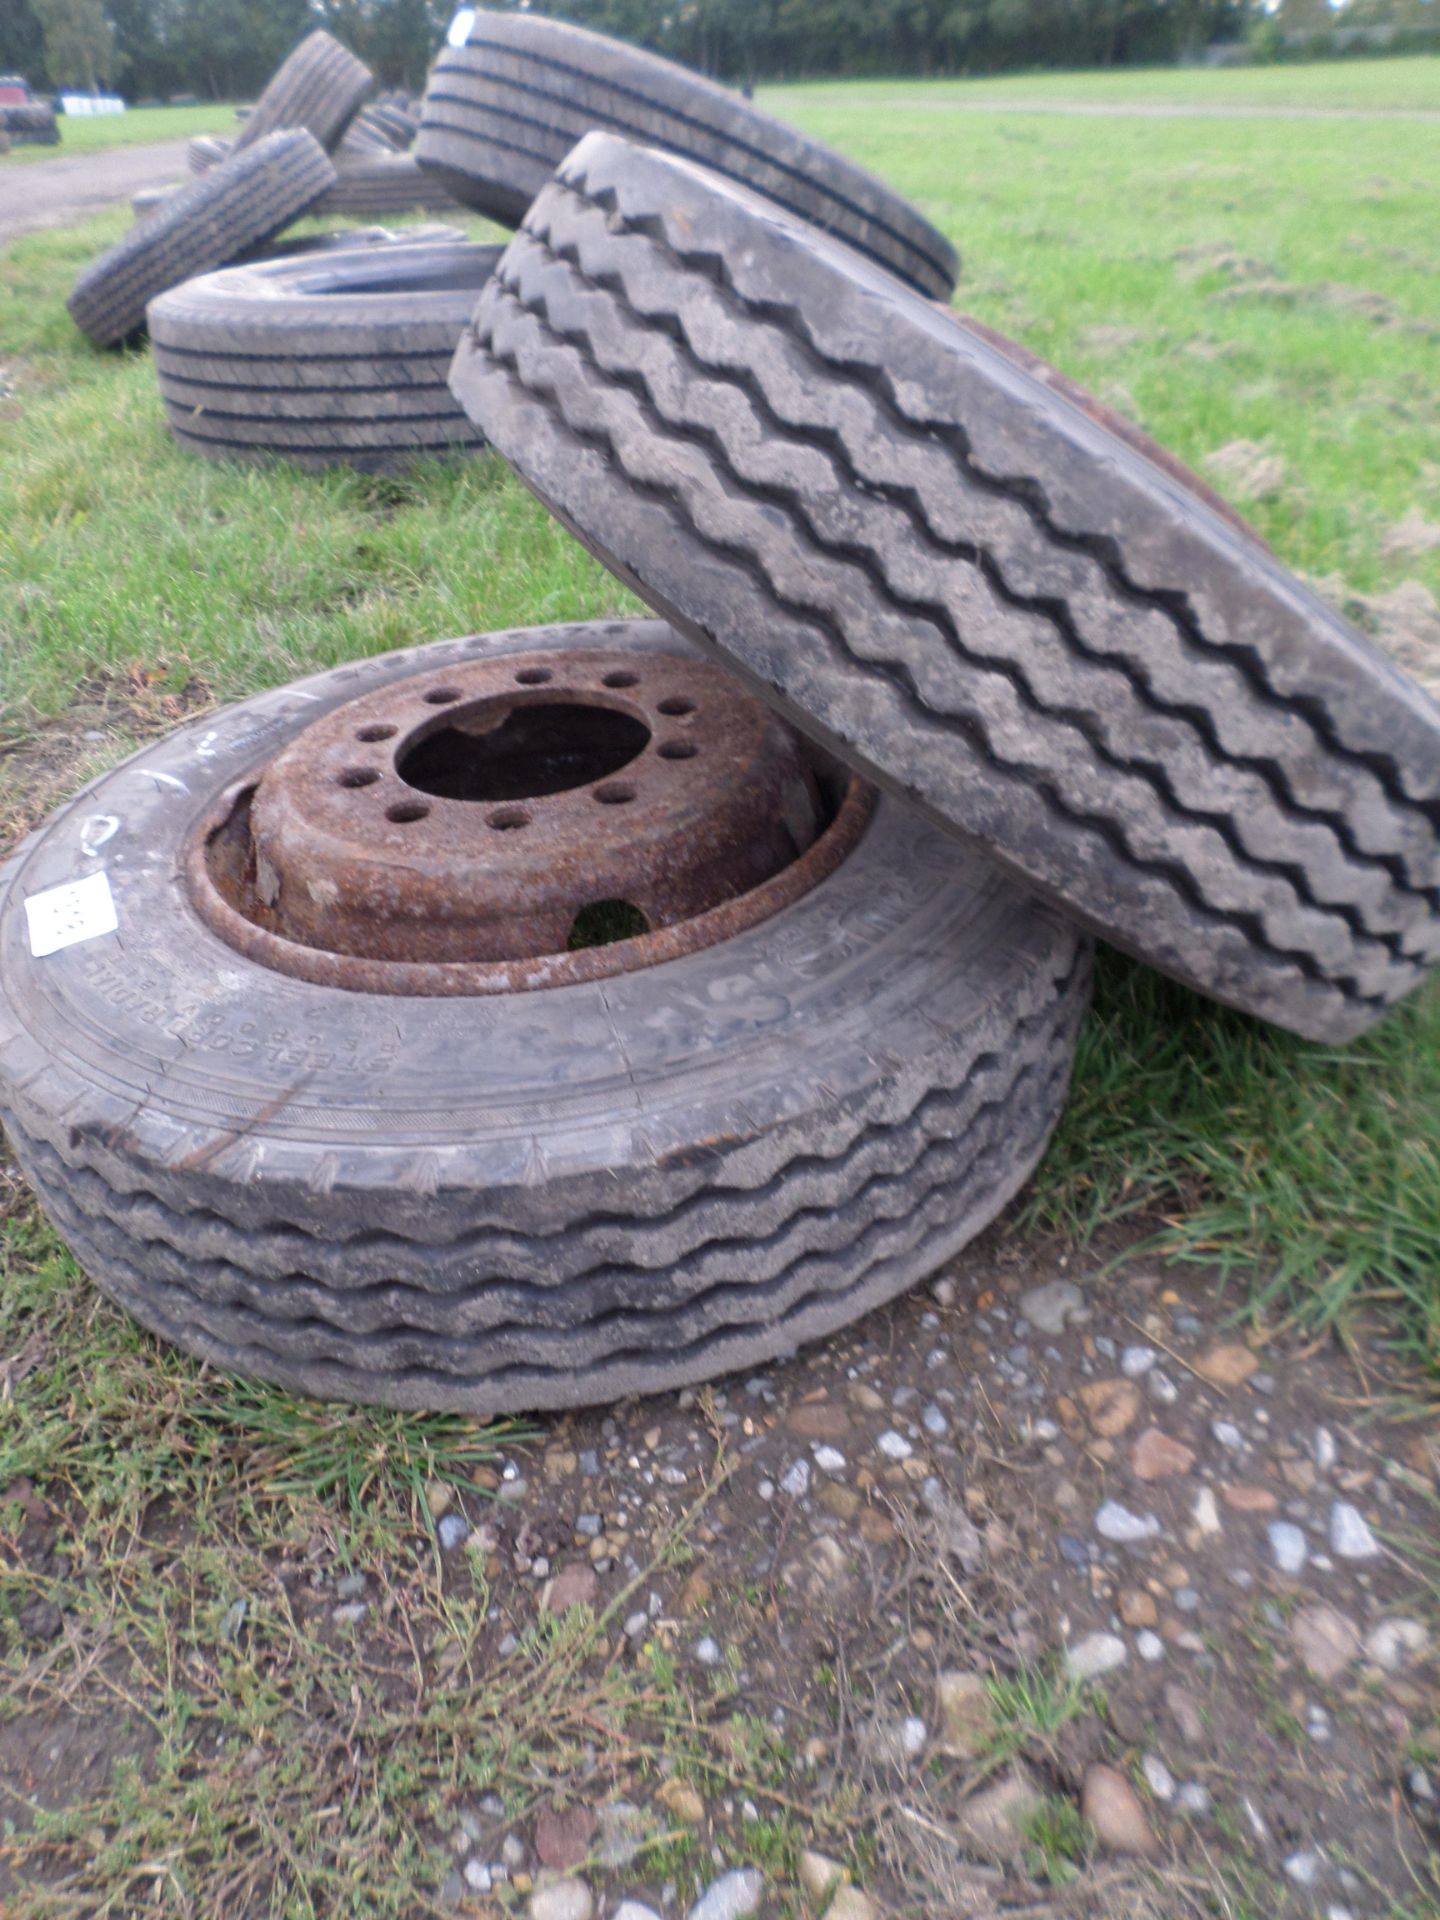 2 trailer tyres 215/75/17.5 - Image 3 of 3